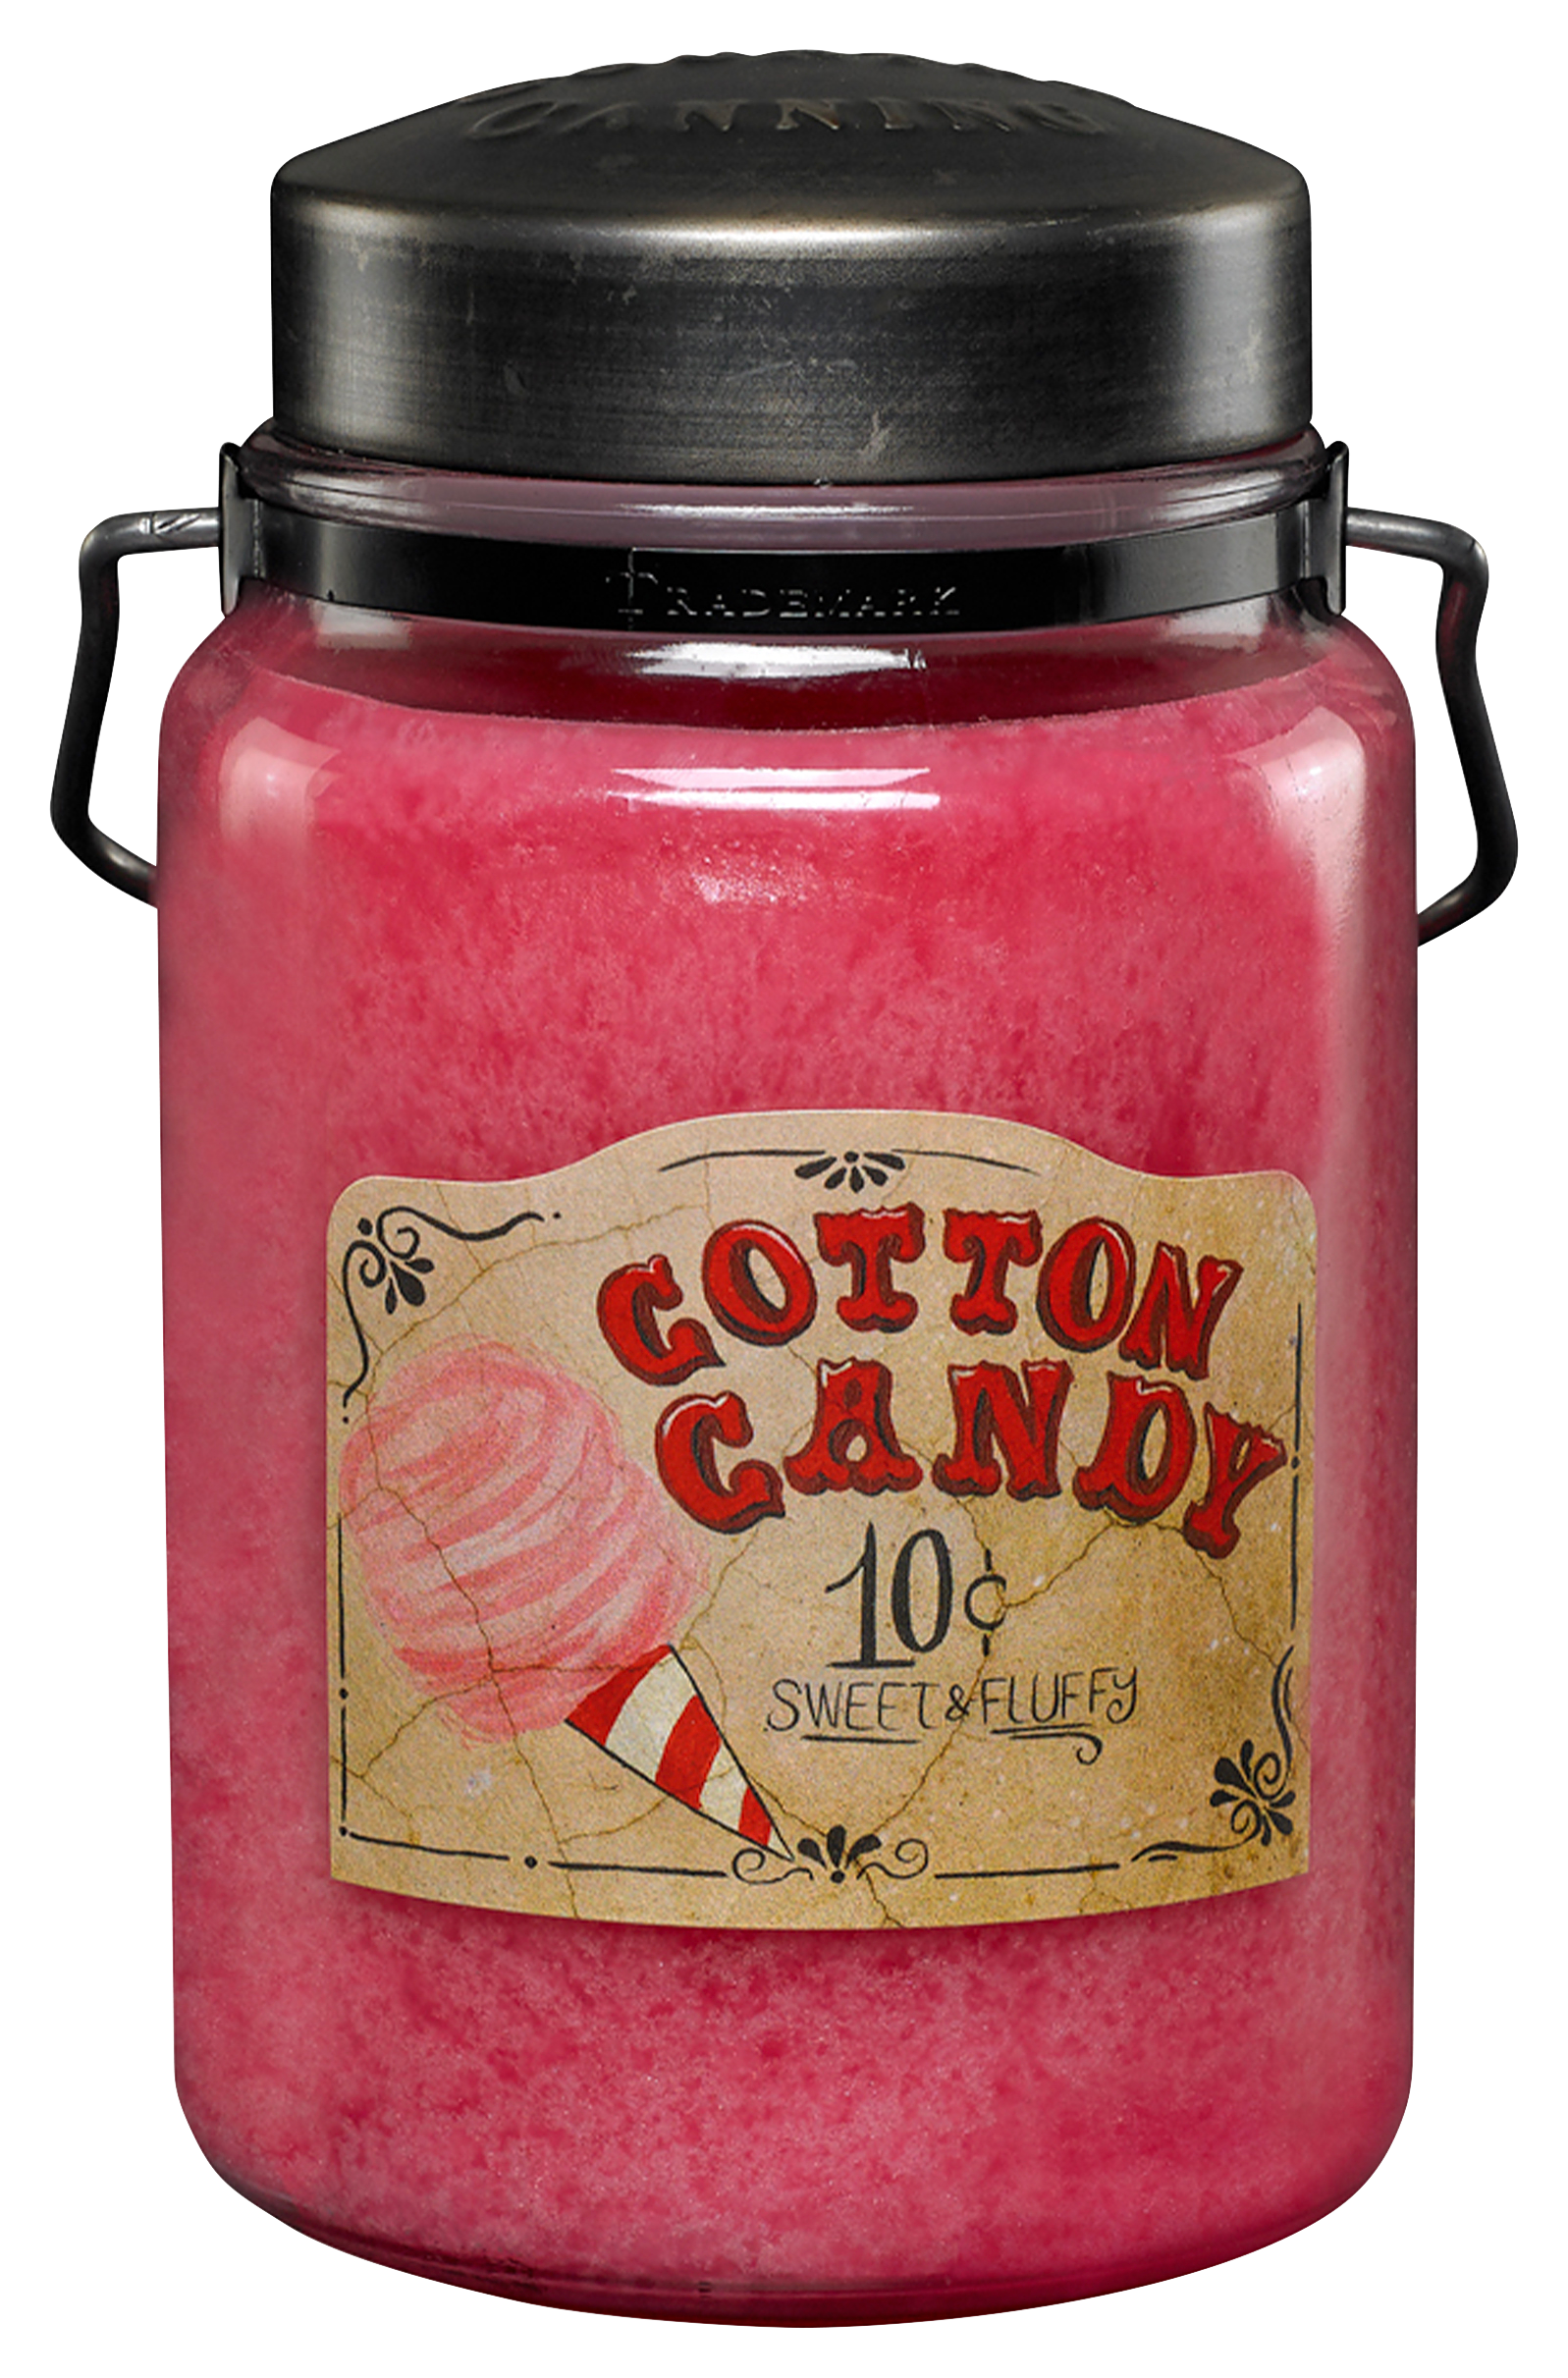 COTTON CANDY Indulgence 18oz – McCall's Candles